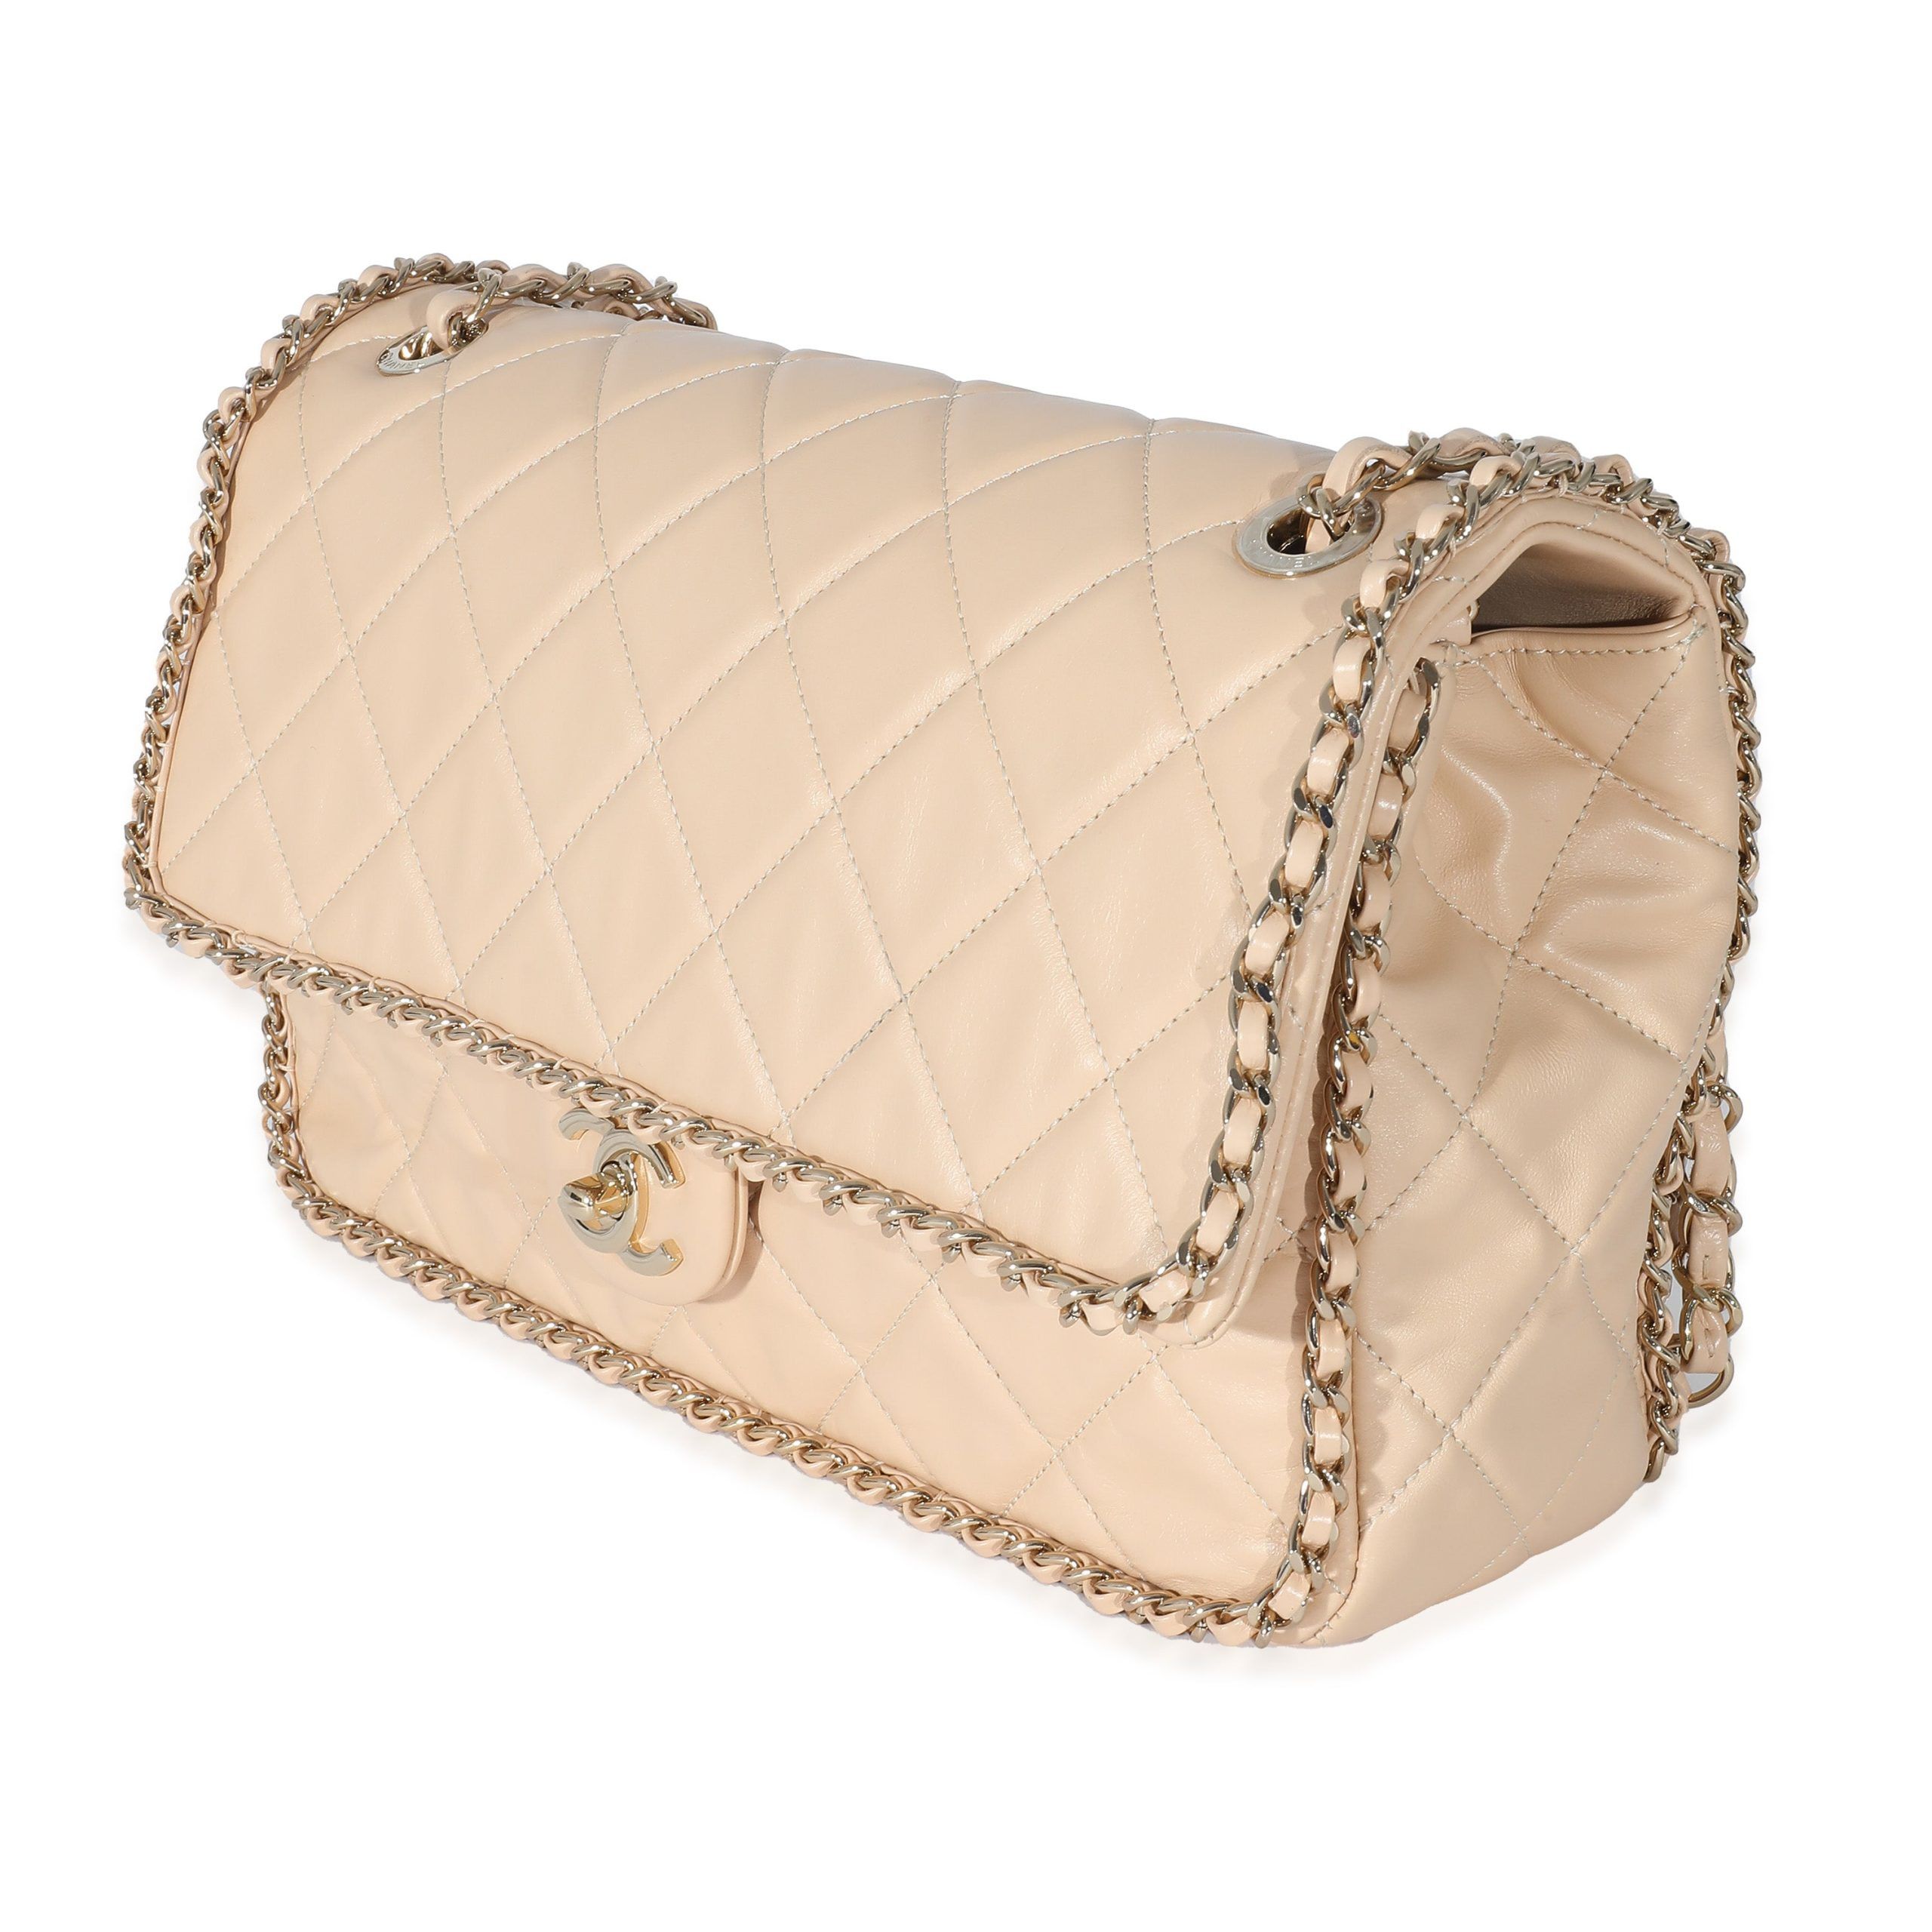 Chanel Chanel Beige Crumpled Calfskin Medium Chain All Over Flap Bag Size ONE SIZE - 2 Preview